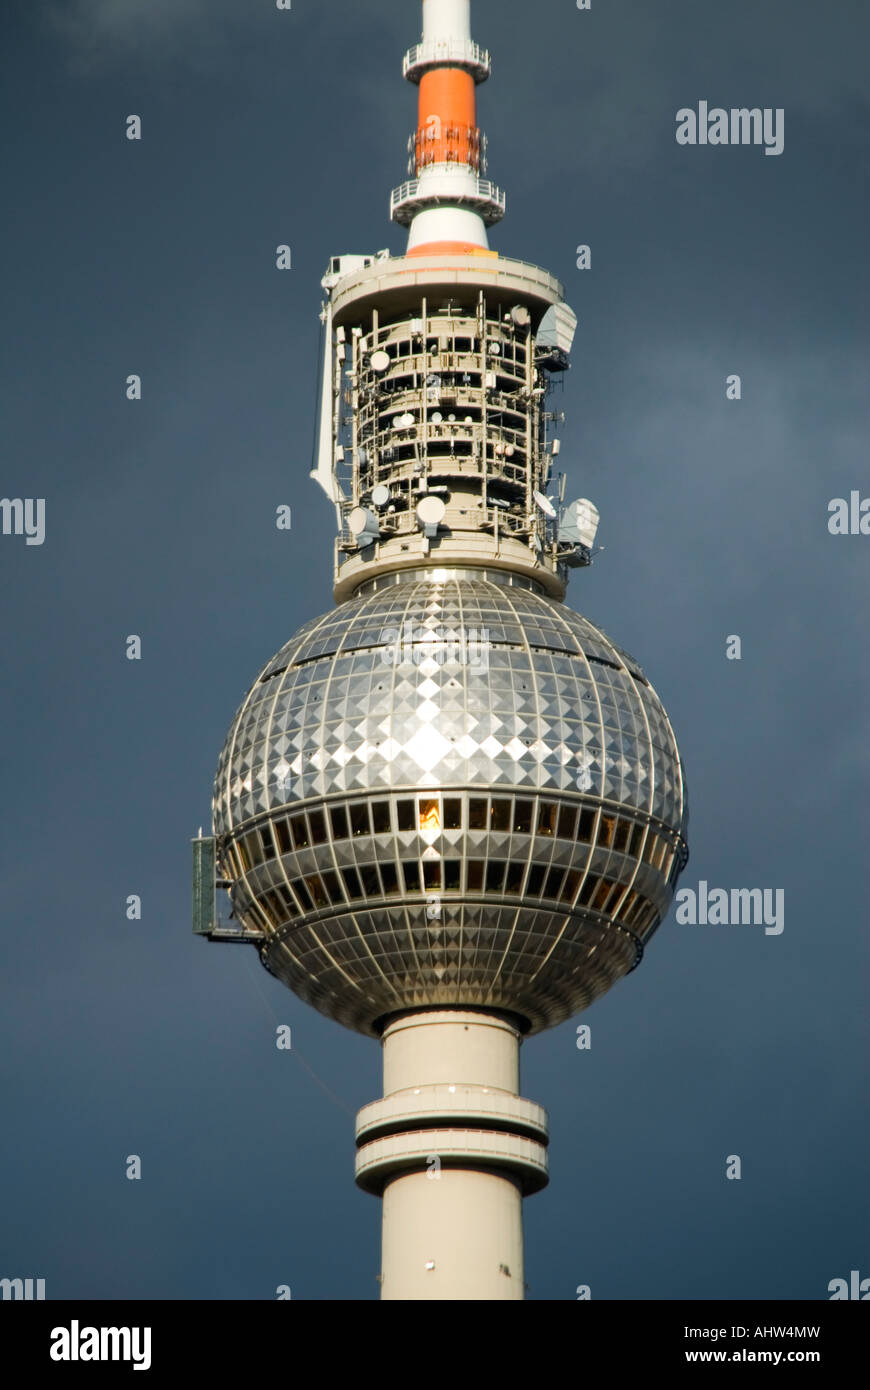 Vertical close up of the TV tower 'Fernsehturm' against dark grey storm clouds. Stock Photo